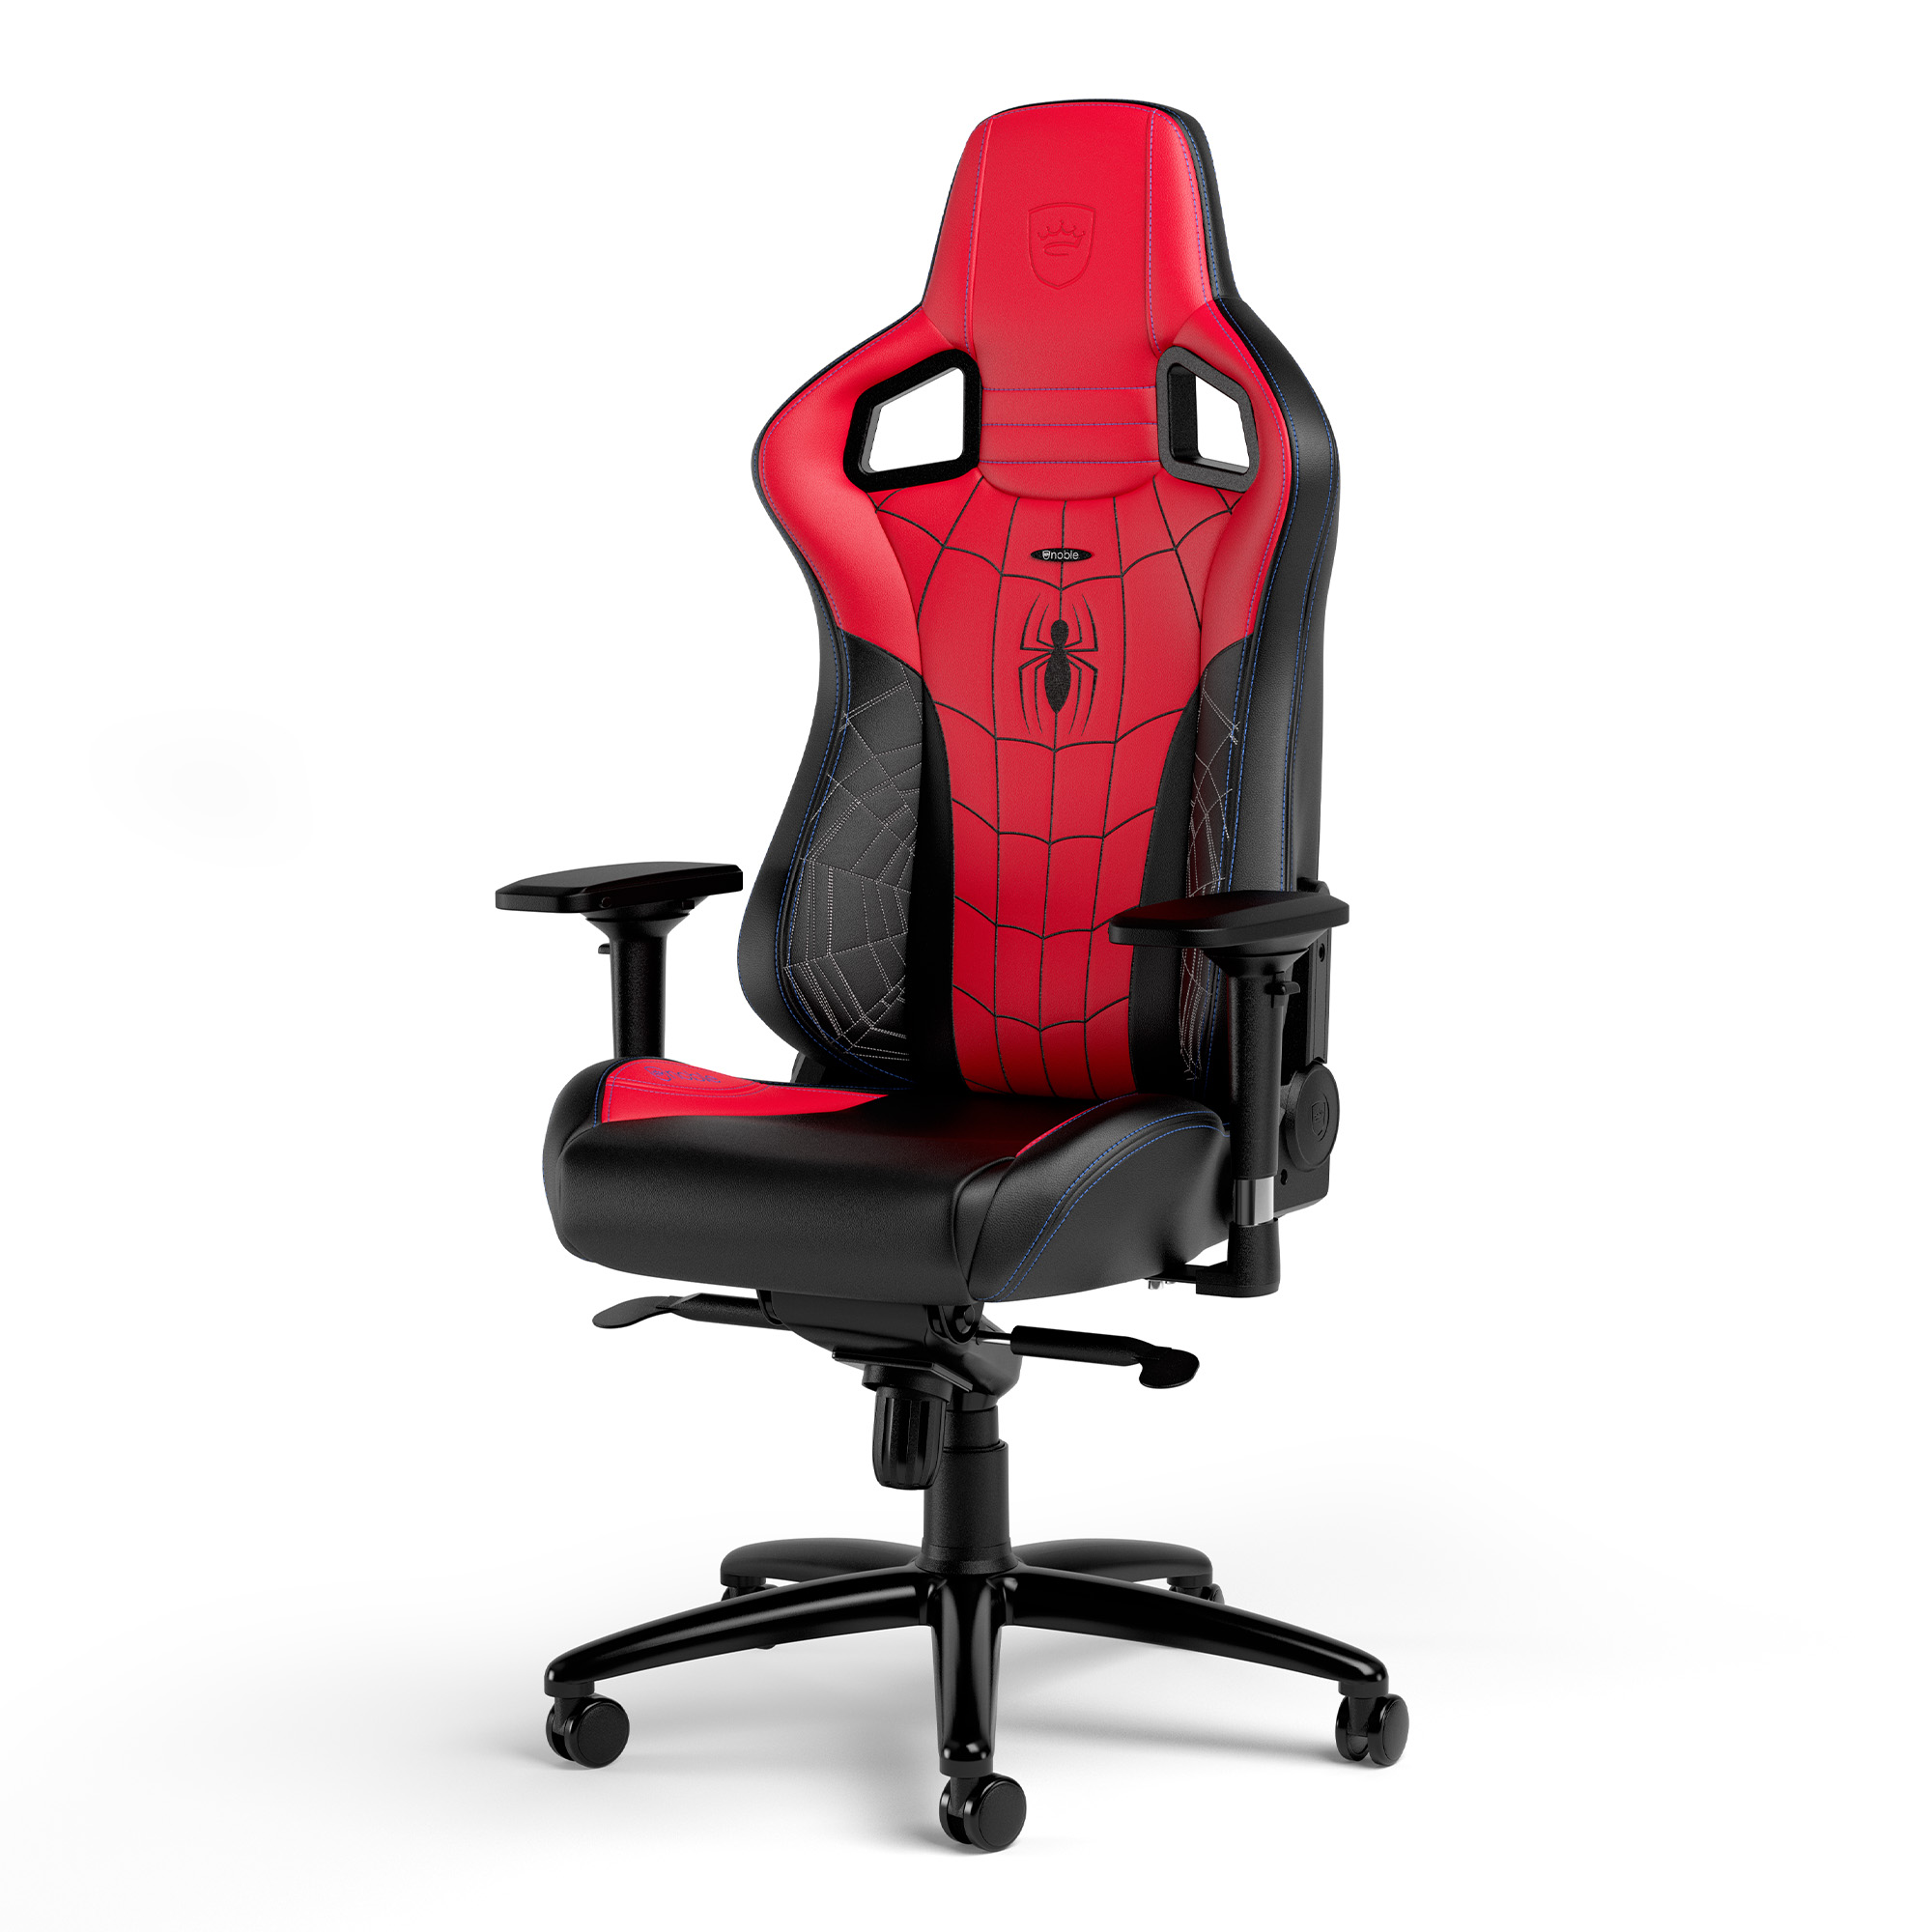 noblechairs - noblechairs EPIC Gaming Chair - Spider-Man Edition